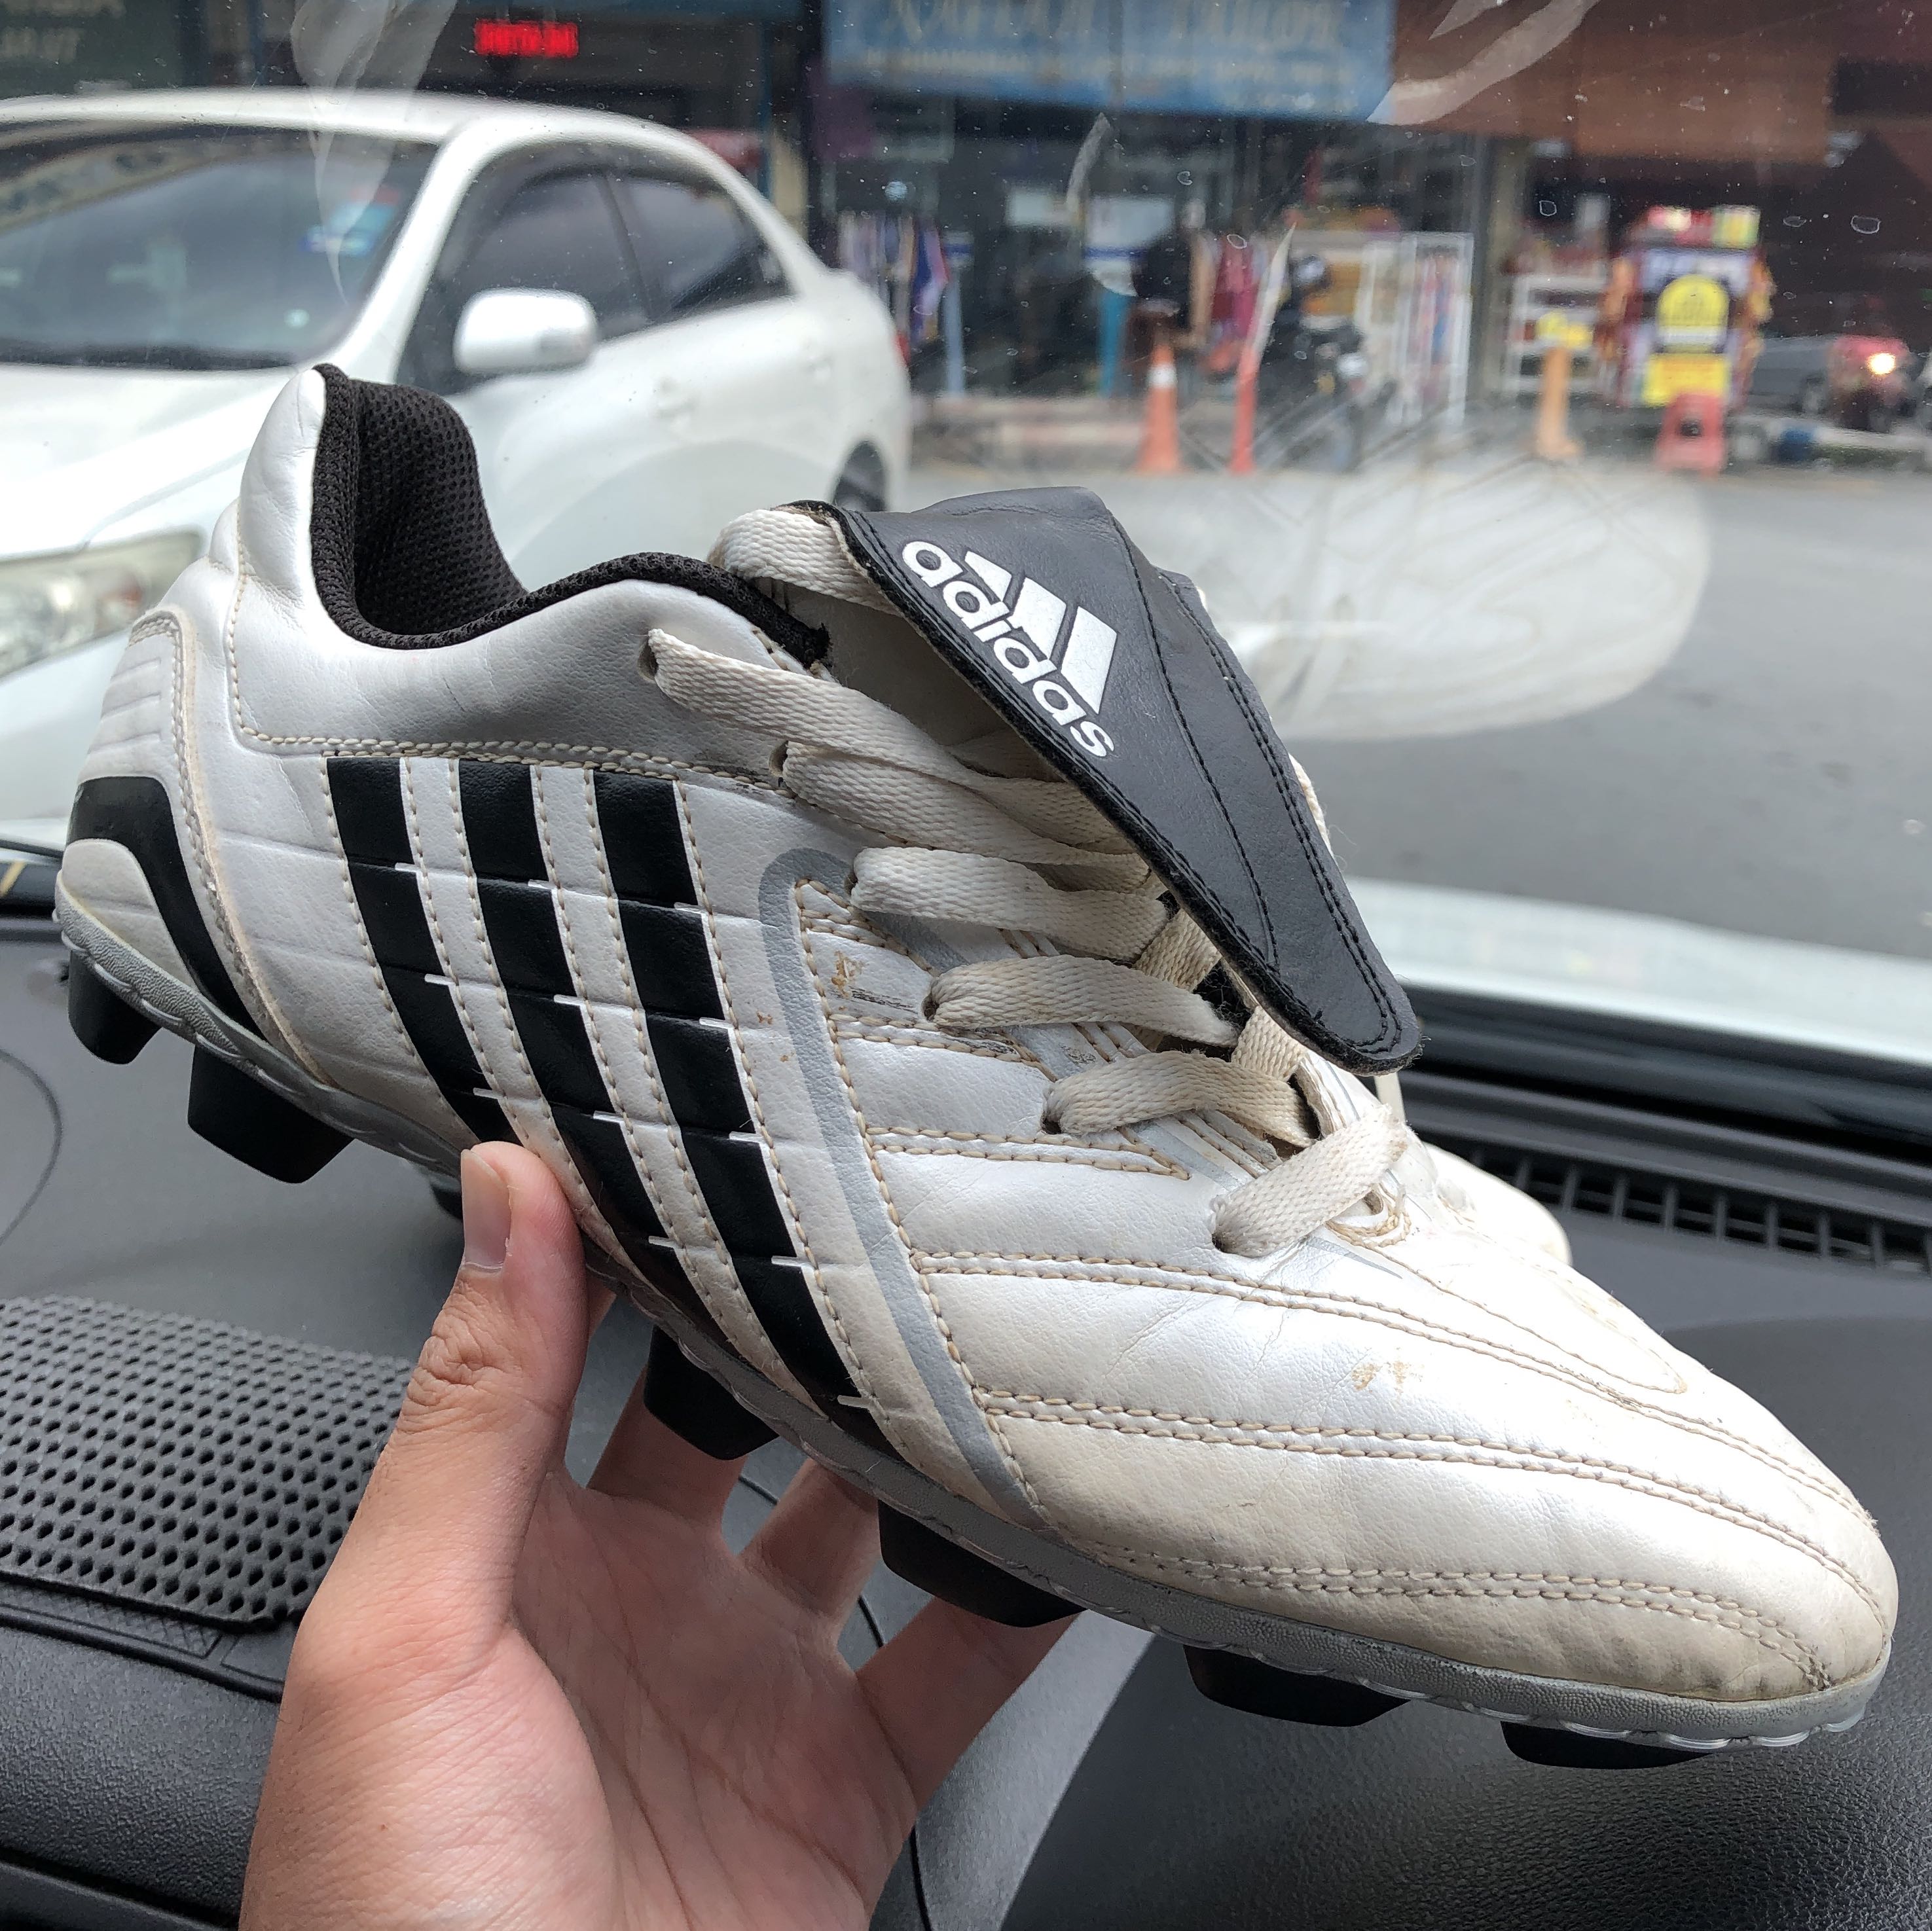 Predator adidas 2009 authentic football soccer boots, Men's Fashion,  Footwear, Boots on Carousell